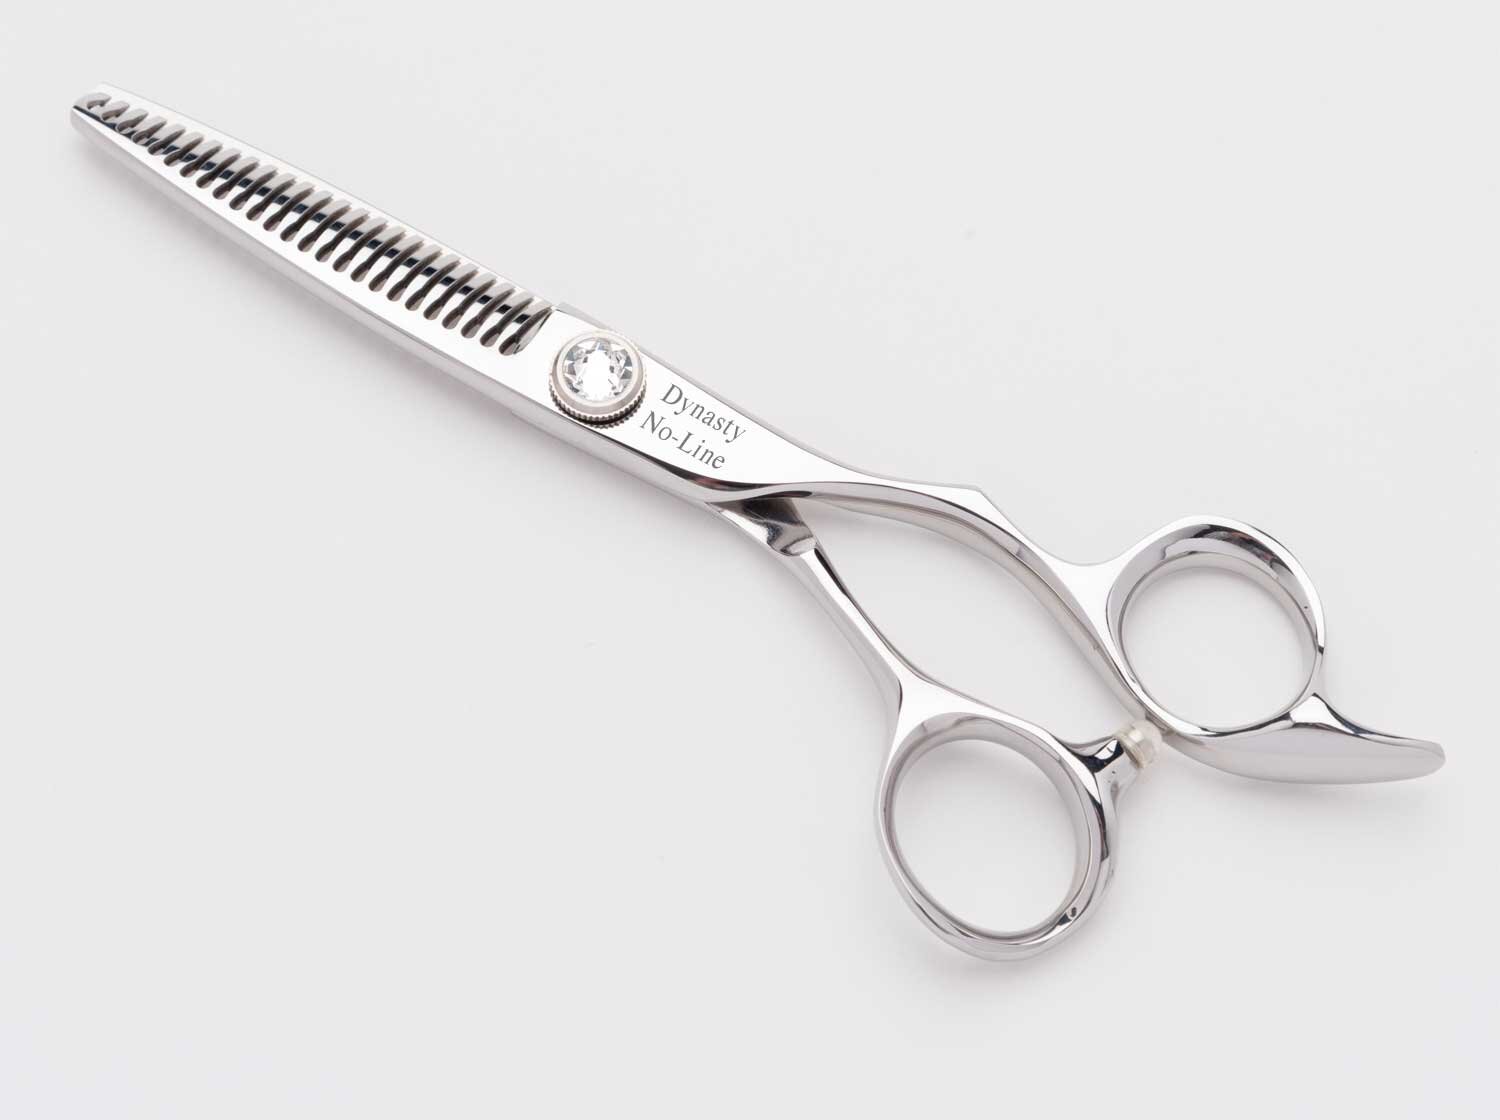 General Hair Shear Sharpening and Service Guidelines | Scissor Mall |  Scissor Mall